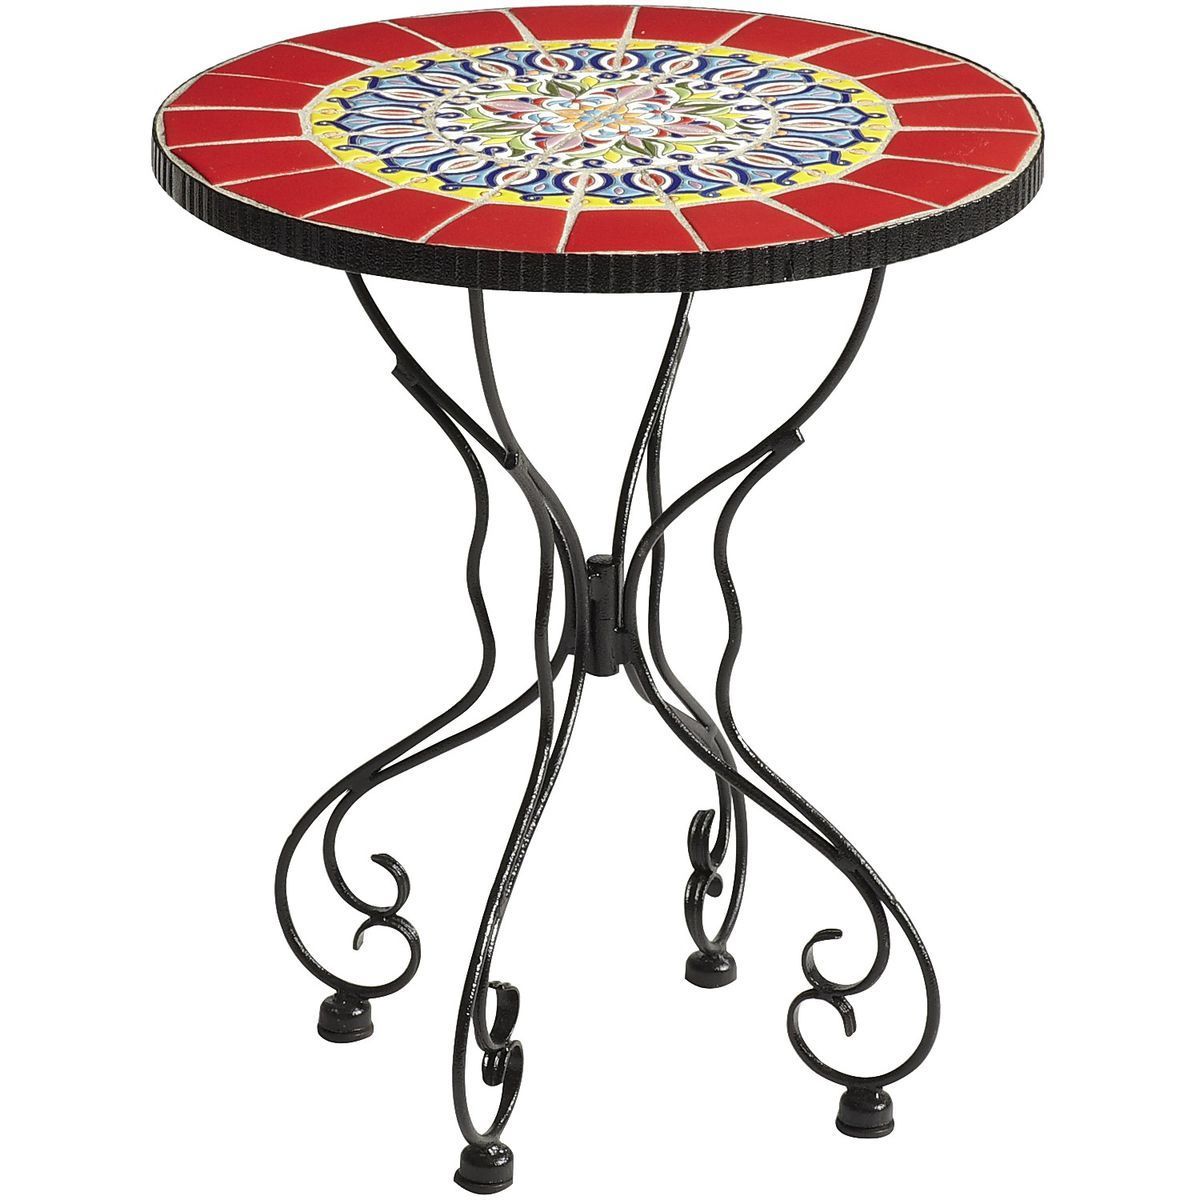 Rania Accent Table – Red | Mosaic Accent Table, Outdoor Accent Table In Mosaic Tile Top Round Side Tables (View 9 of 15)